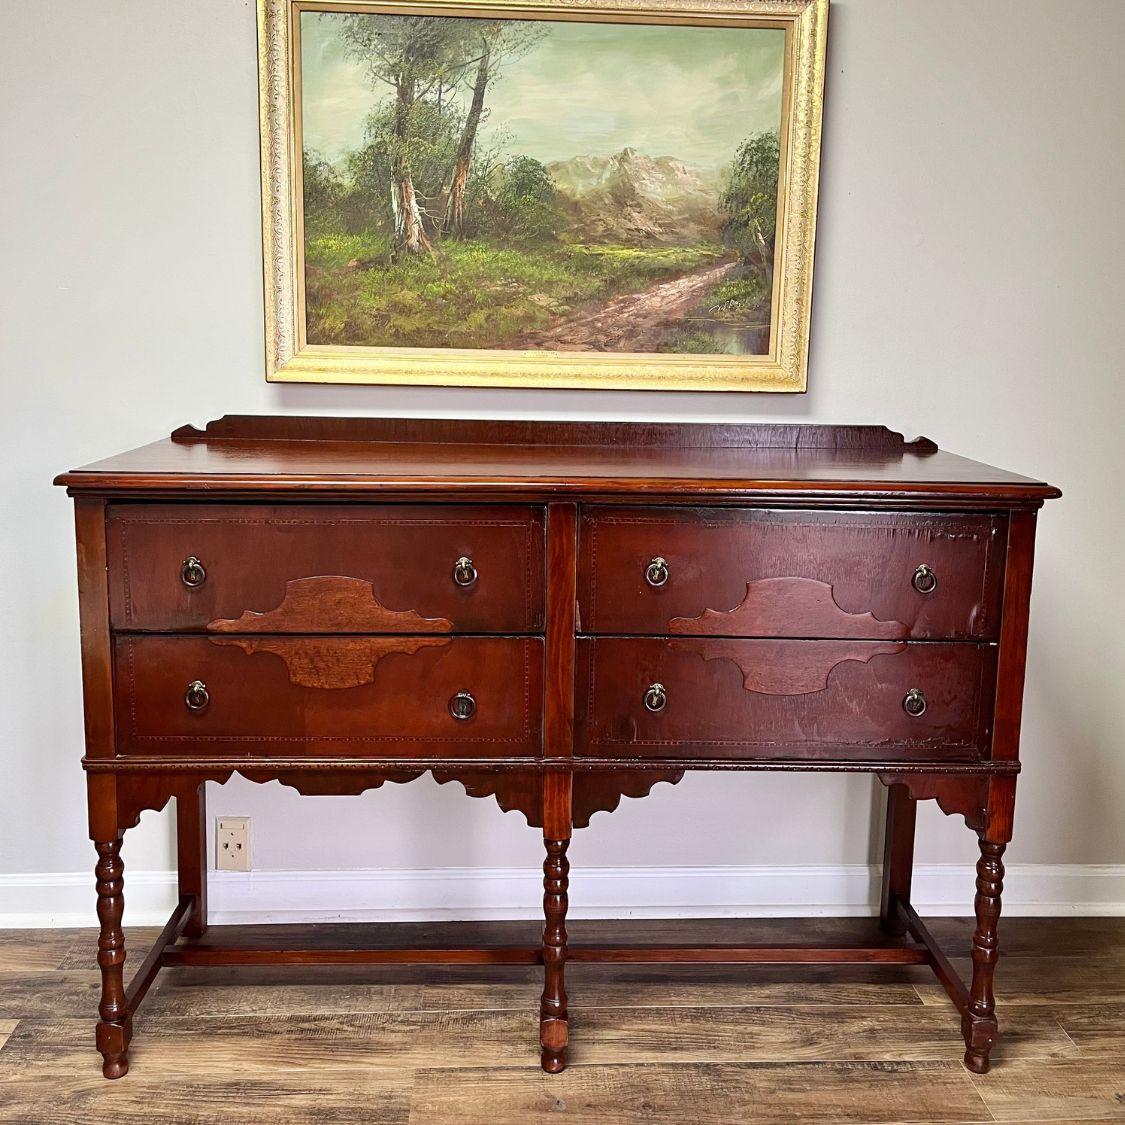 Gorgeous 1930s four drawer sideboard. Each drawer front is finely constructed with English dovetail joints. Features beautiful spindle legs.
Would be beautiful used in a dining room to give you more space to serve and store extra dinnerware. Also